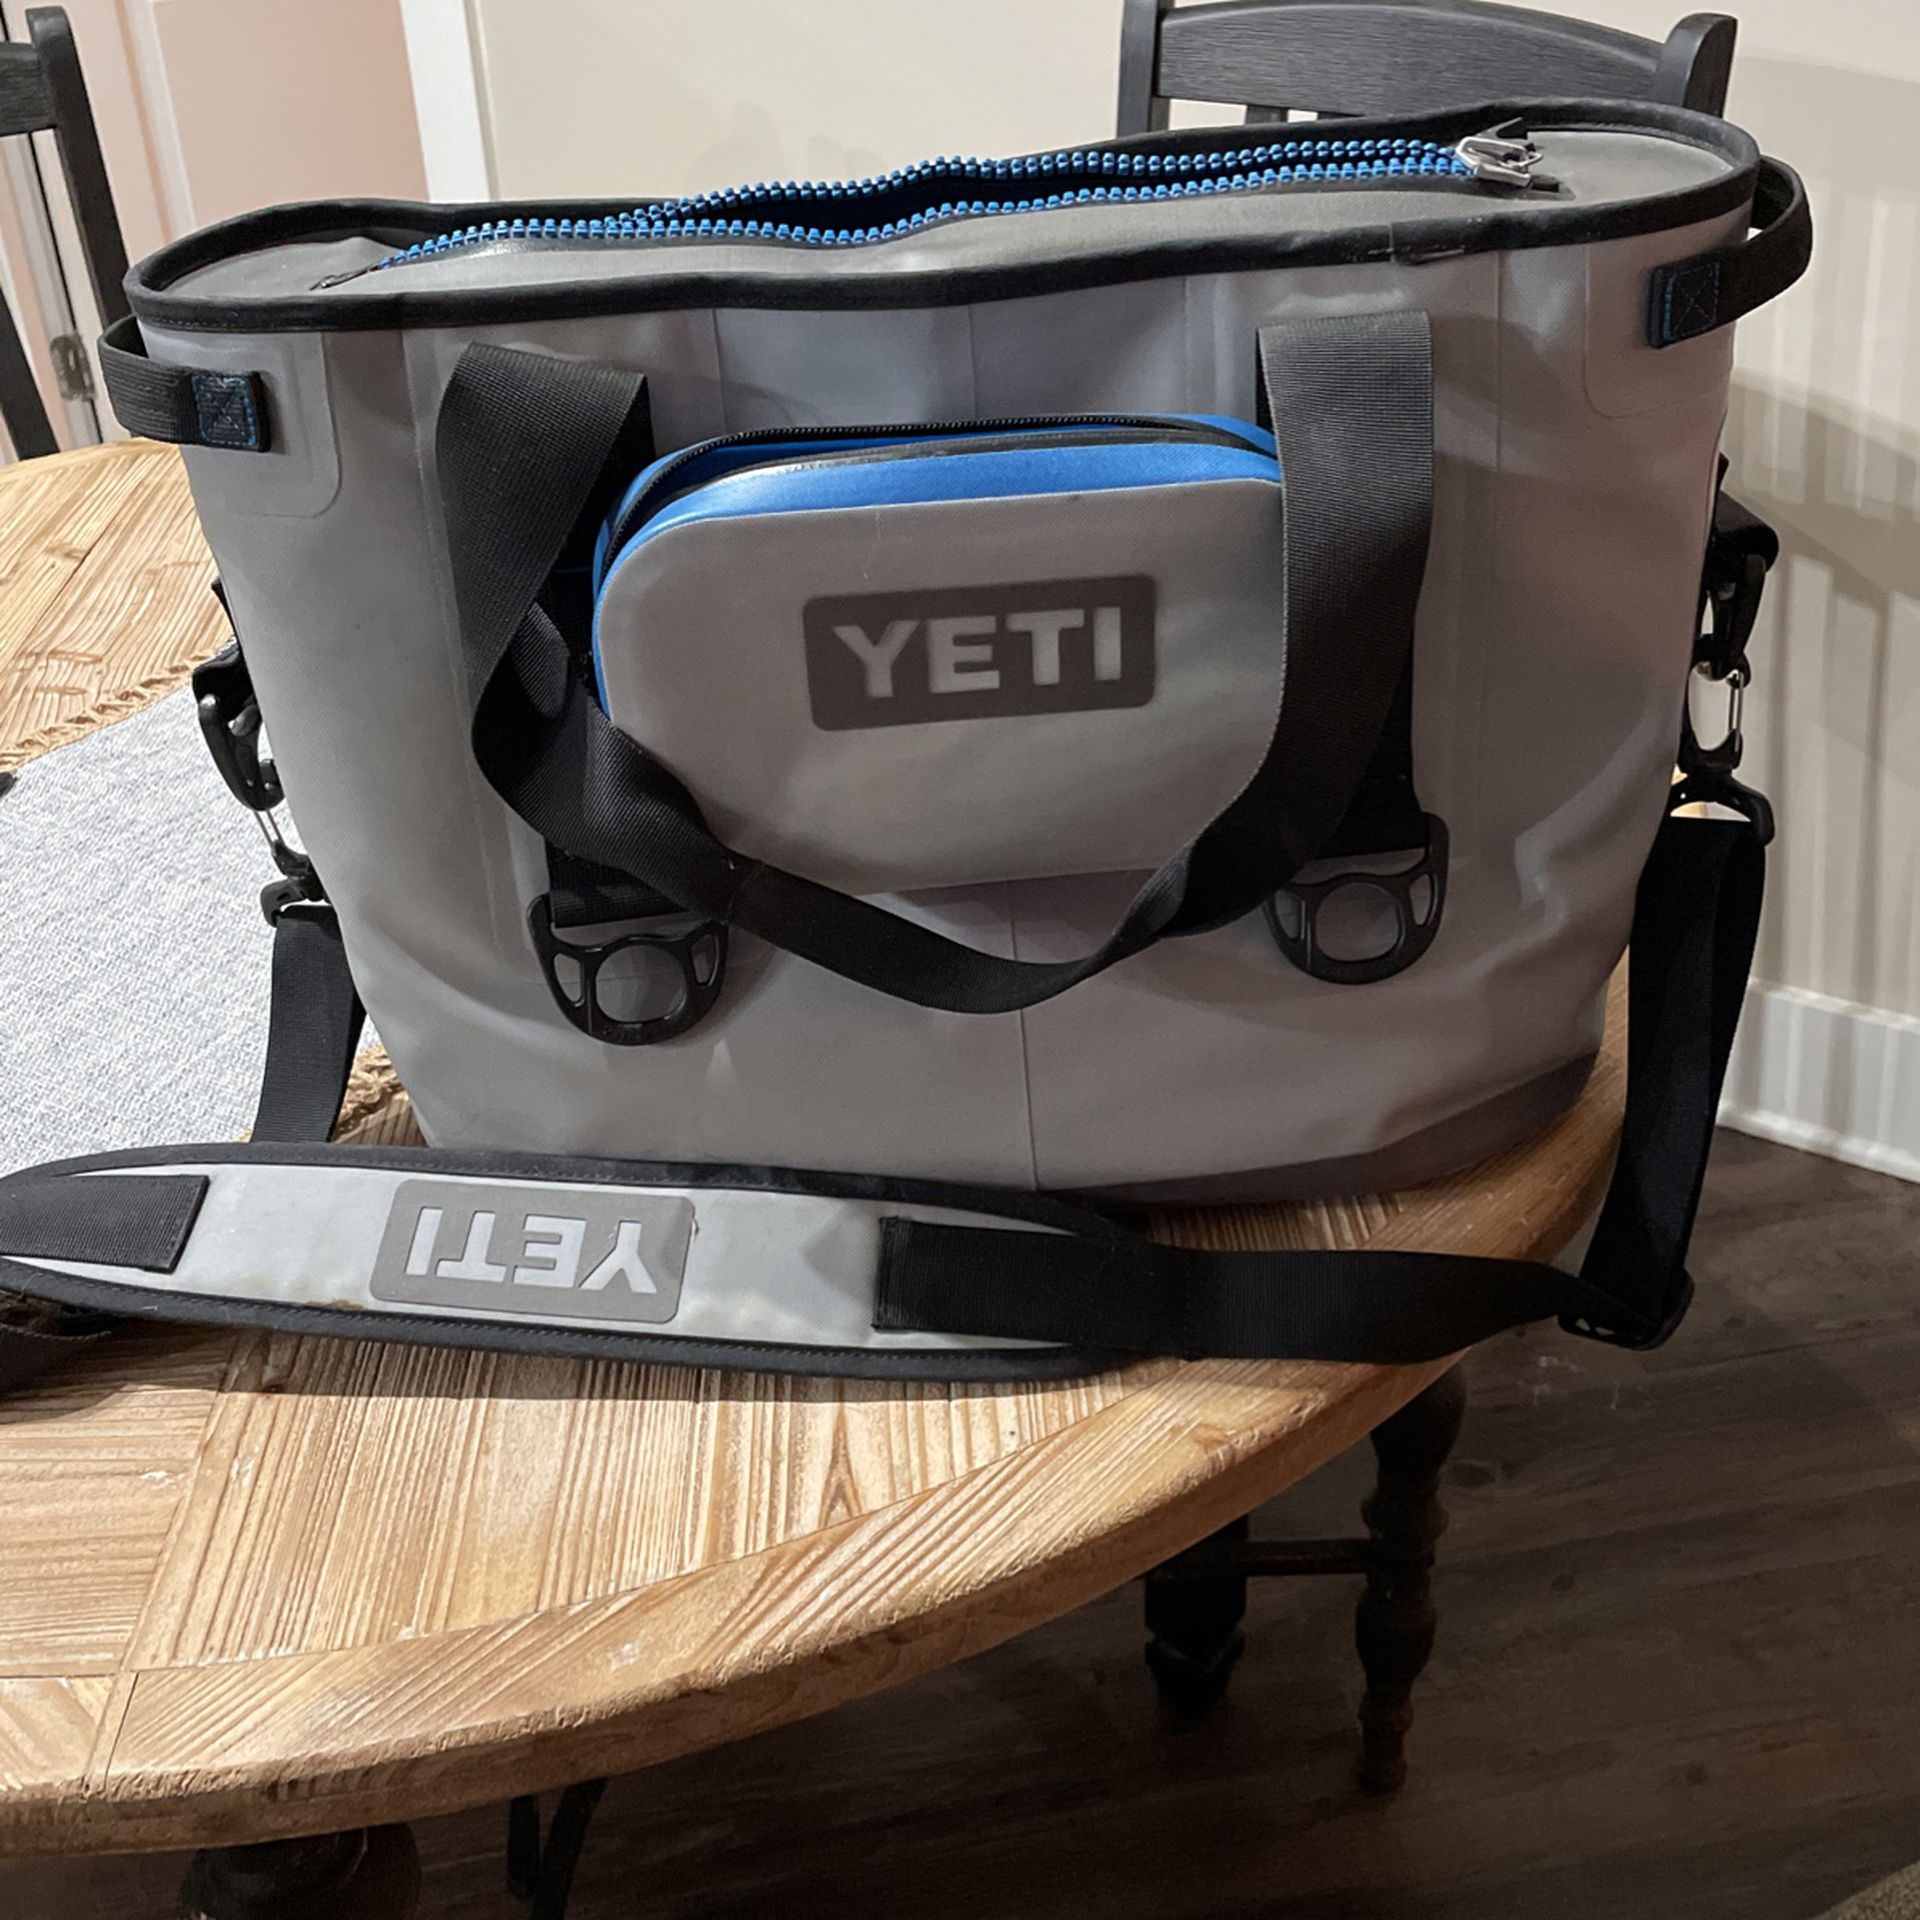 Yeti Hopper 20 (With Accessories)